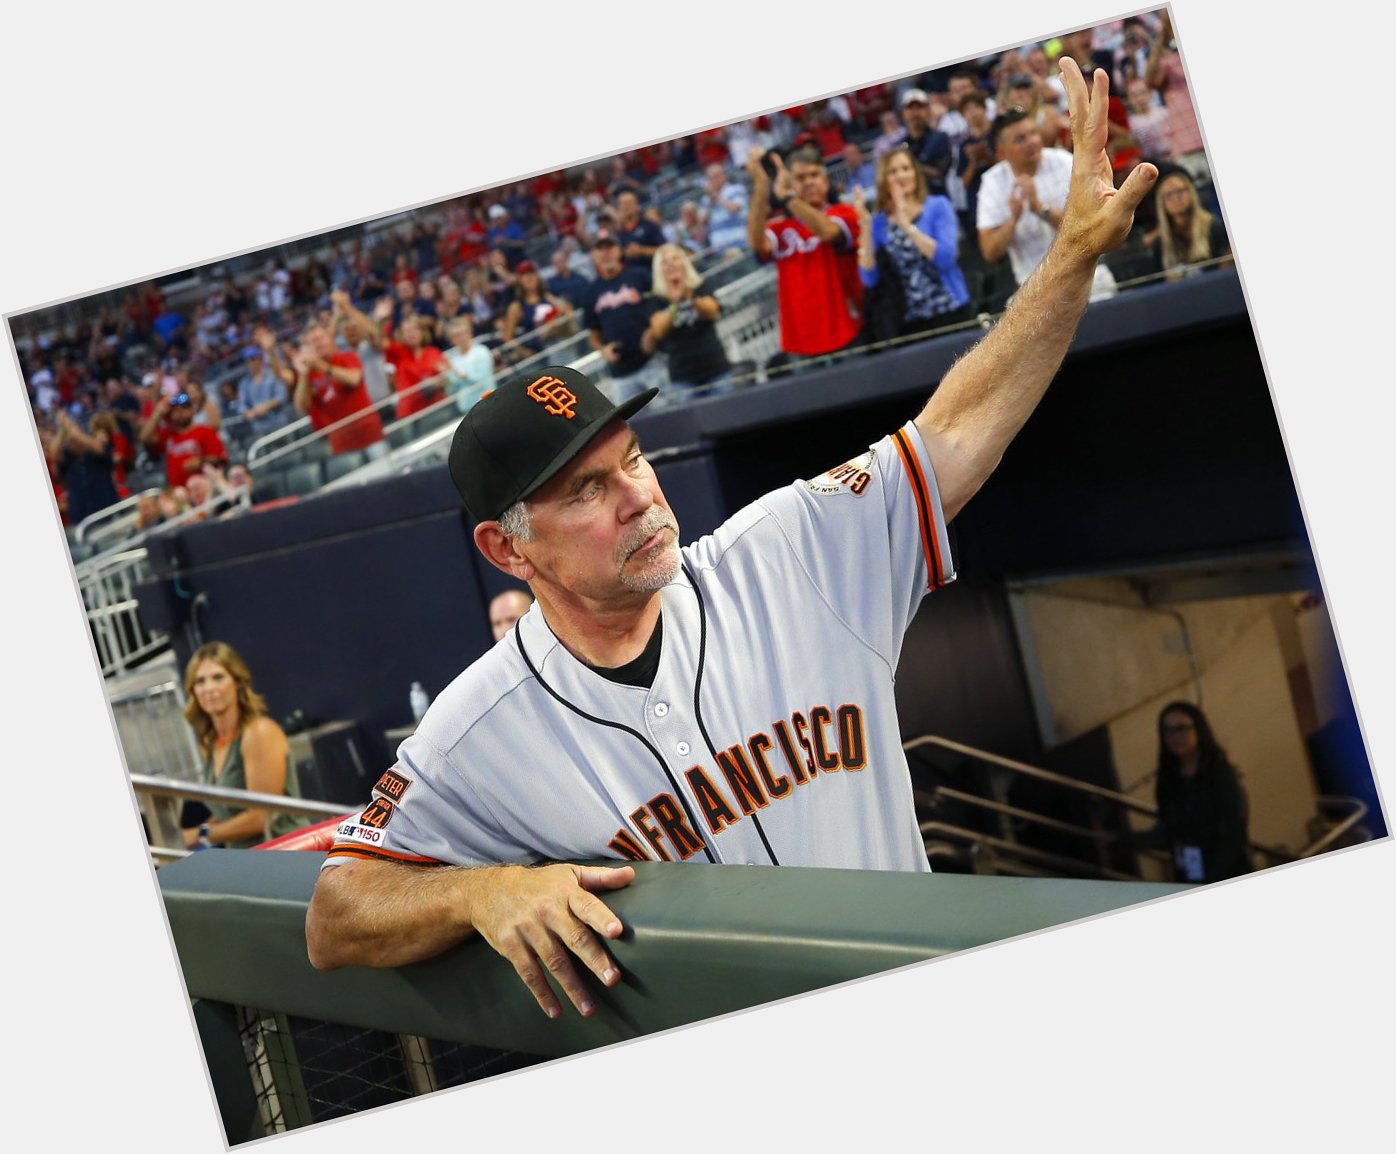 Happy 66th Birthday to Bruce Bochy!

3× World Series champion (2010, 2012, 2014)
NL Manager of the Year (1996) 